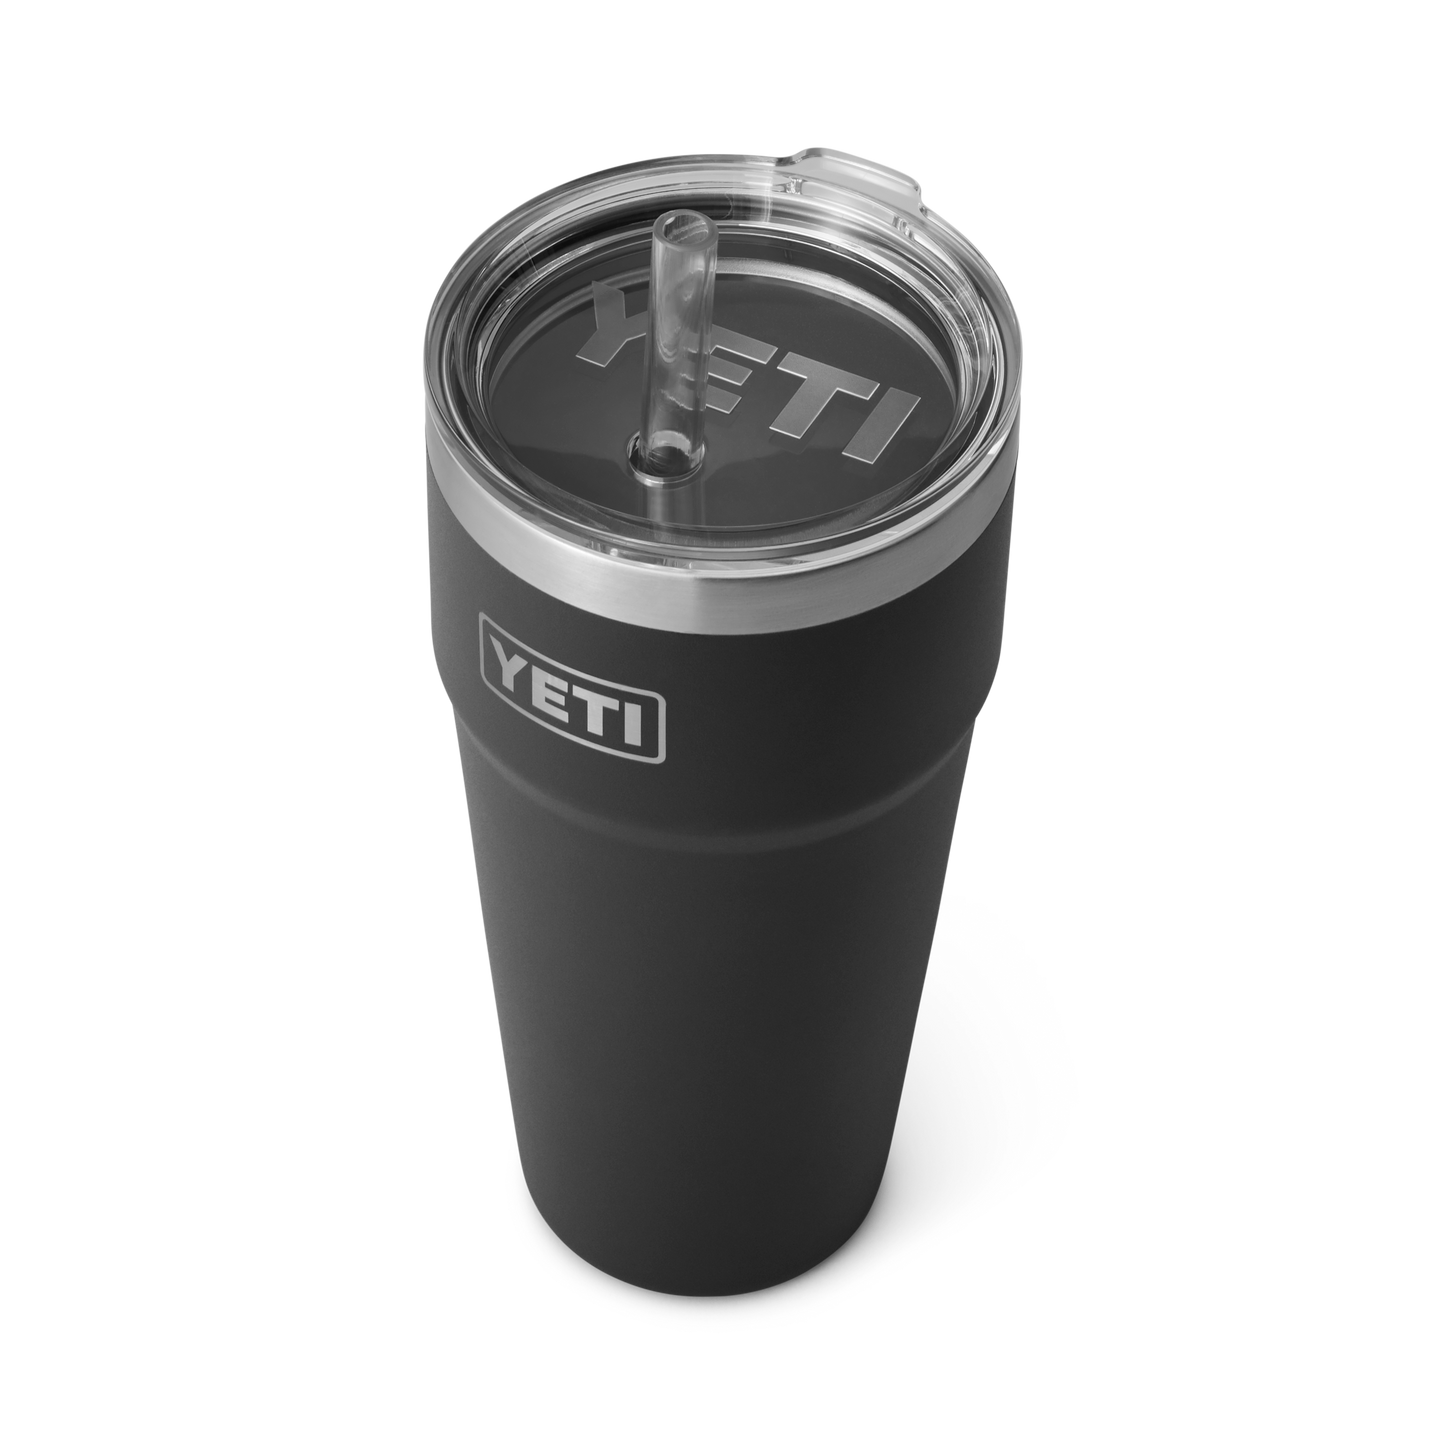 26 oz Stackable Cup with Straw Lid